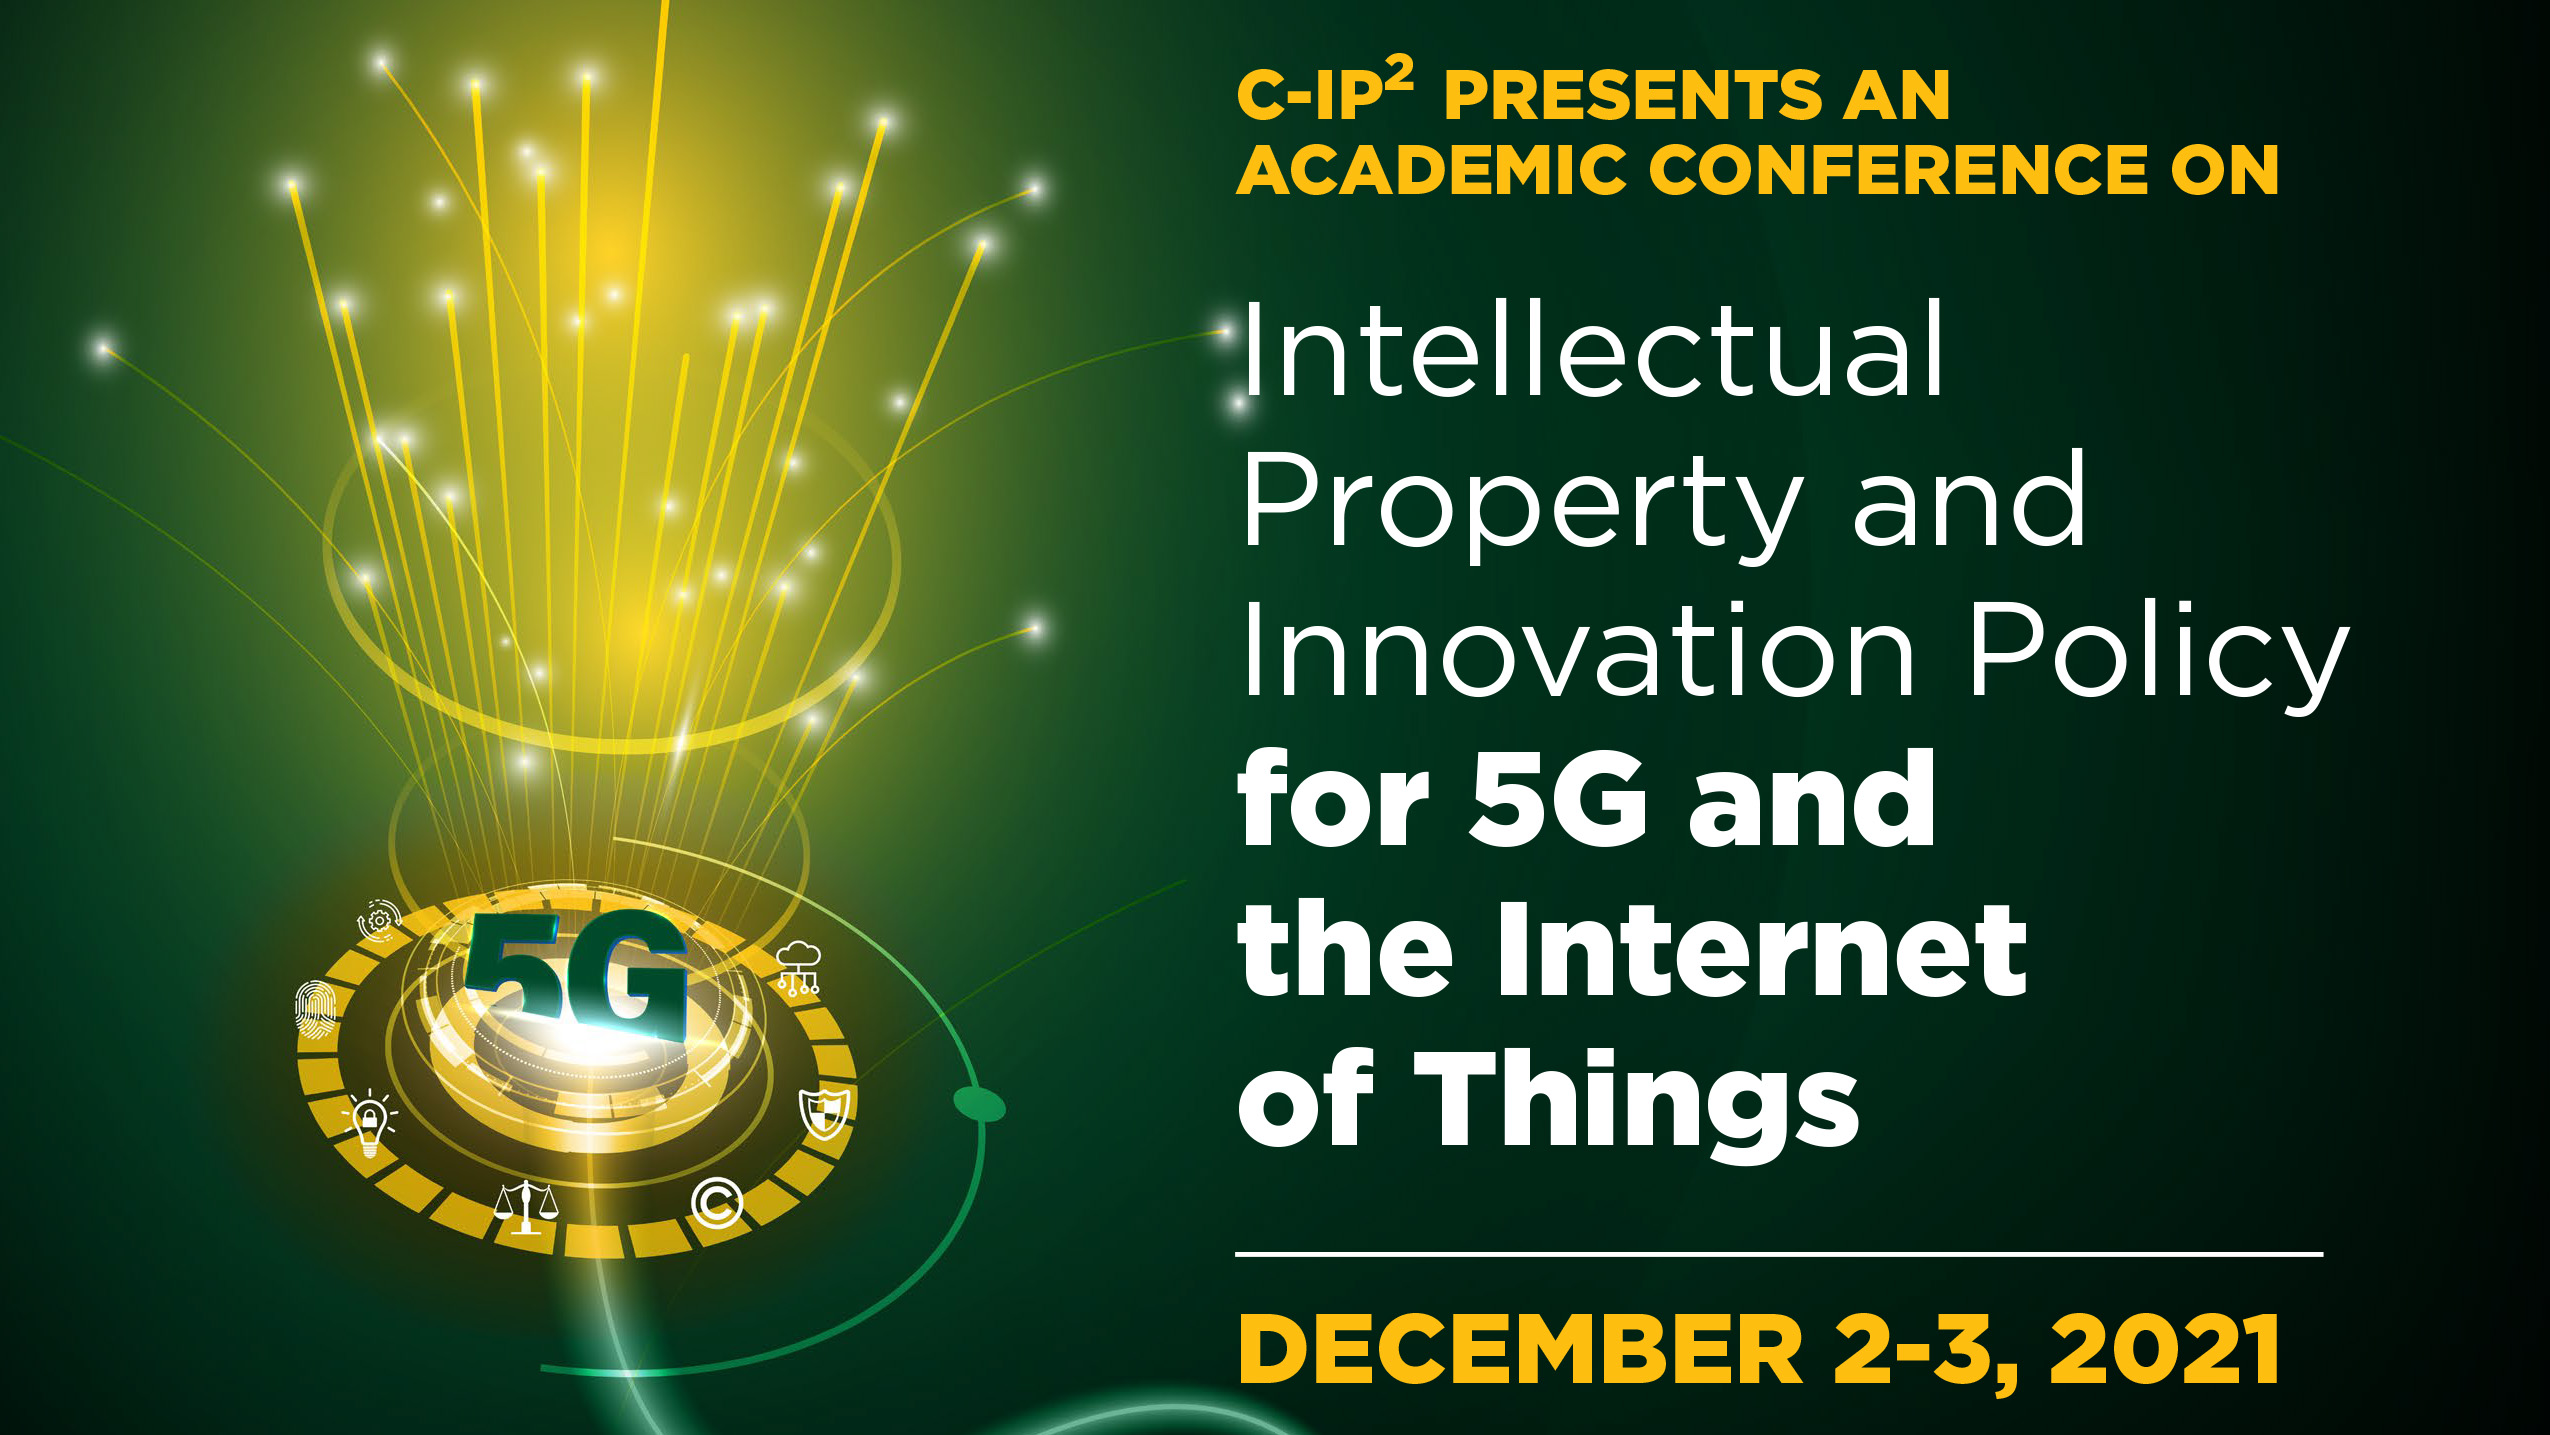 CIP2 Conference on Intellectual Property and Innovation Policy for 5G